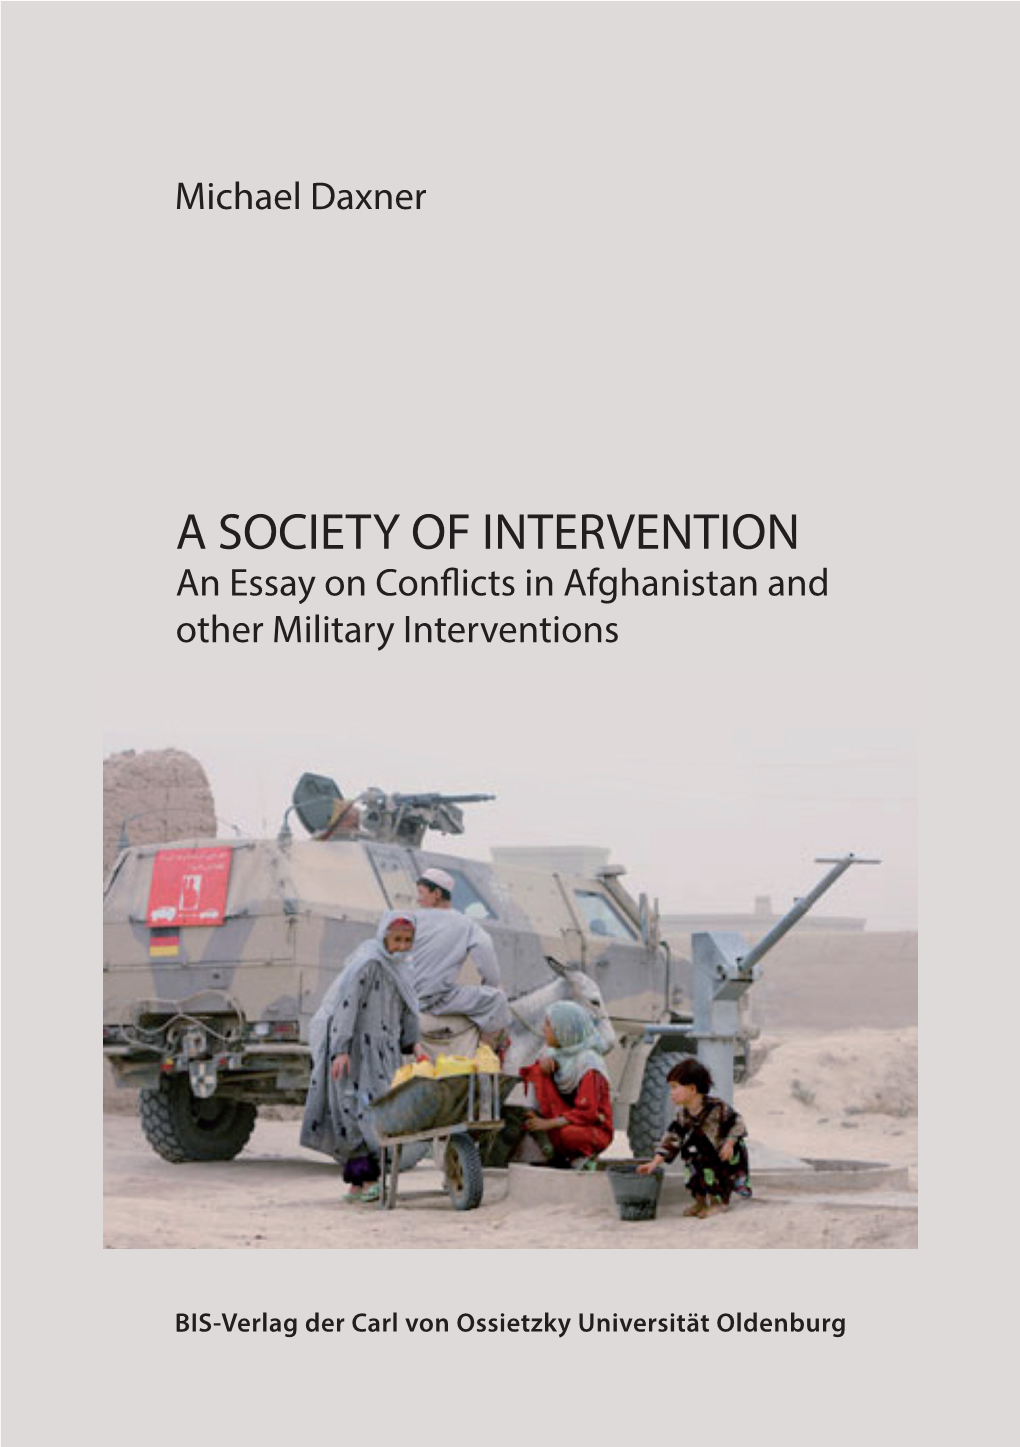 A Society of Intervention: an Essay on Conflicts in Afghanistan and Other